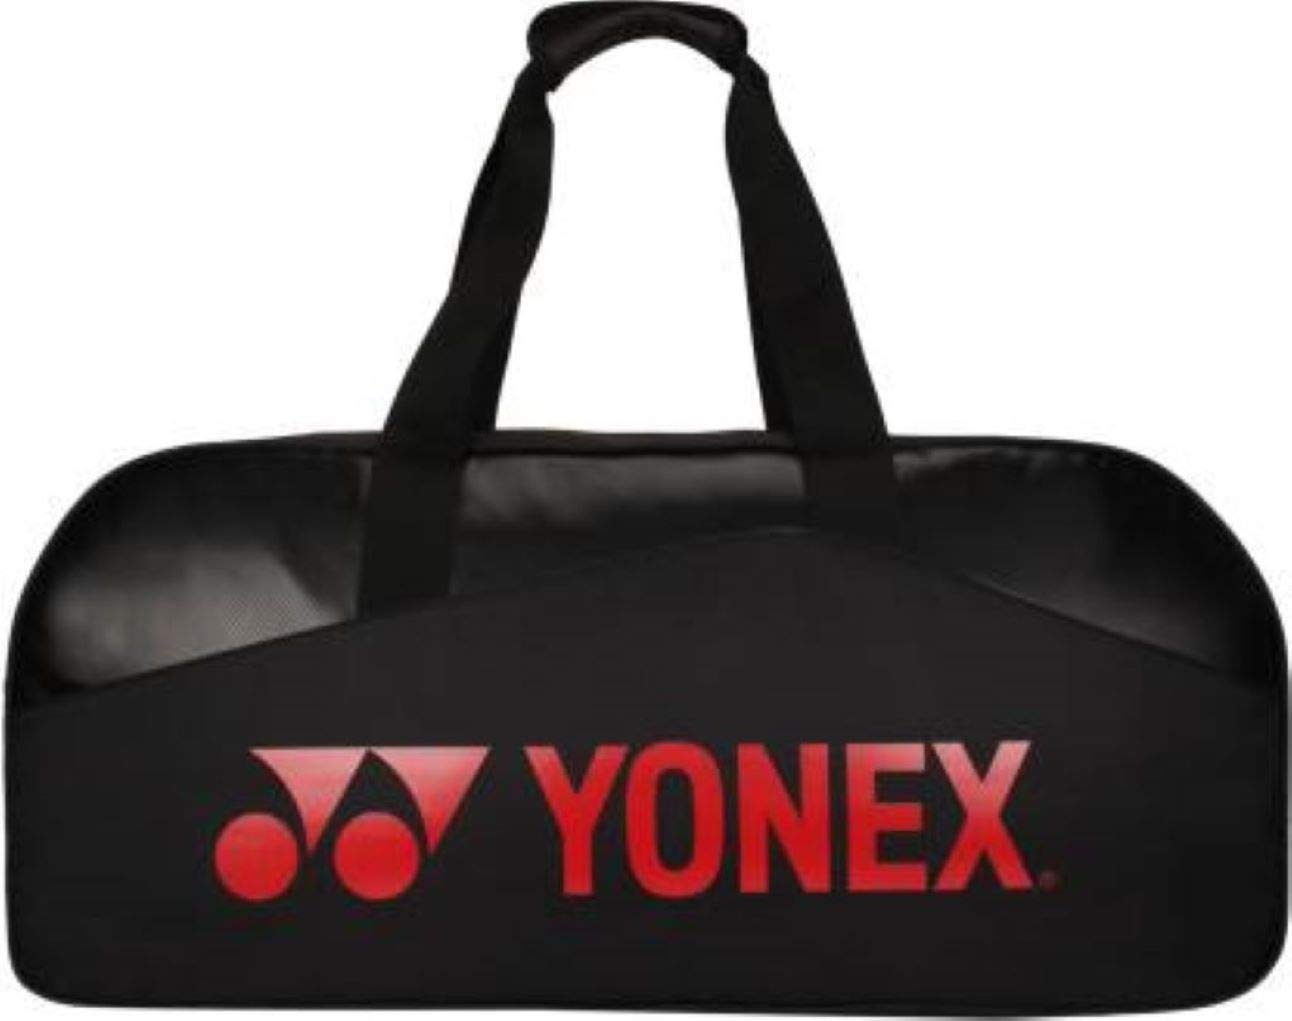 Yonex Endorsed by Legend Lee Chong Wei Special Limited Edition Thermal  Badminton Kitbag (Black/Red) | Shakti Sports & Fitness Pune